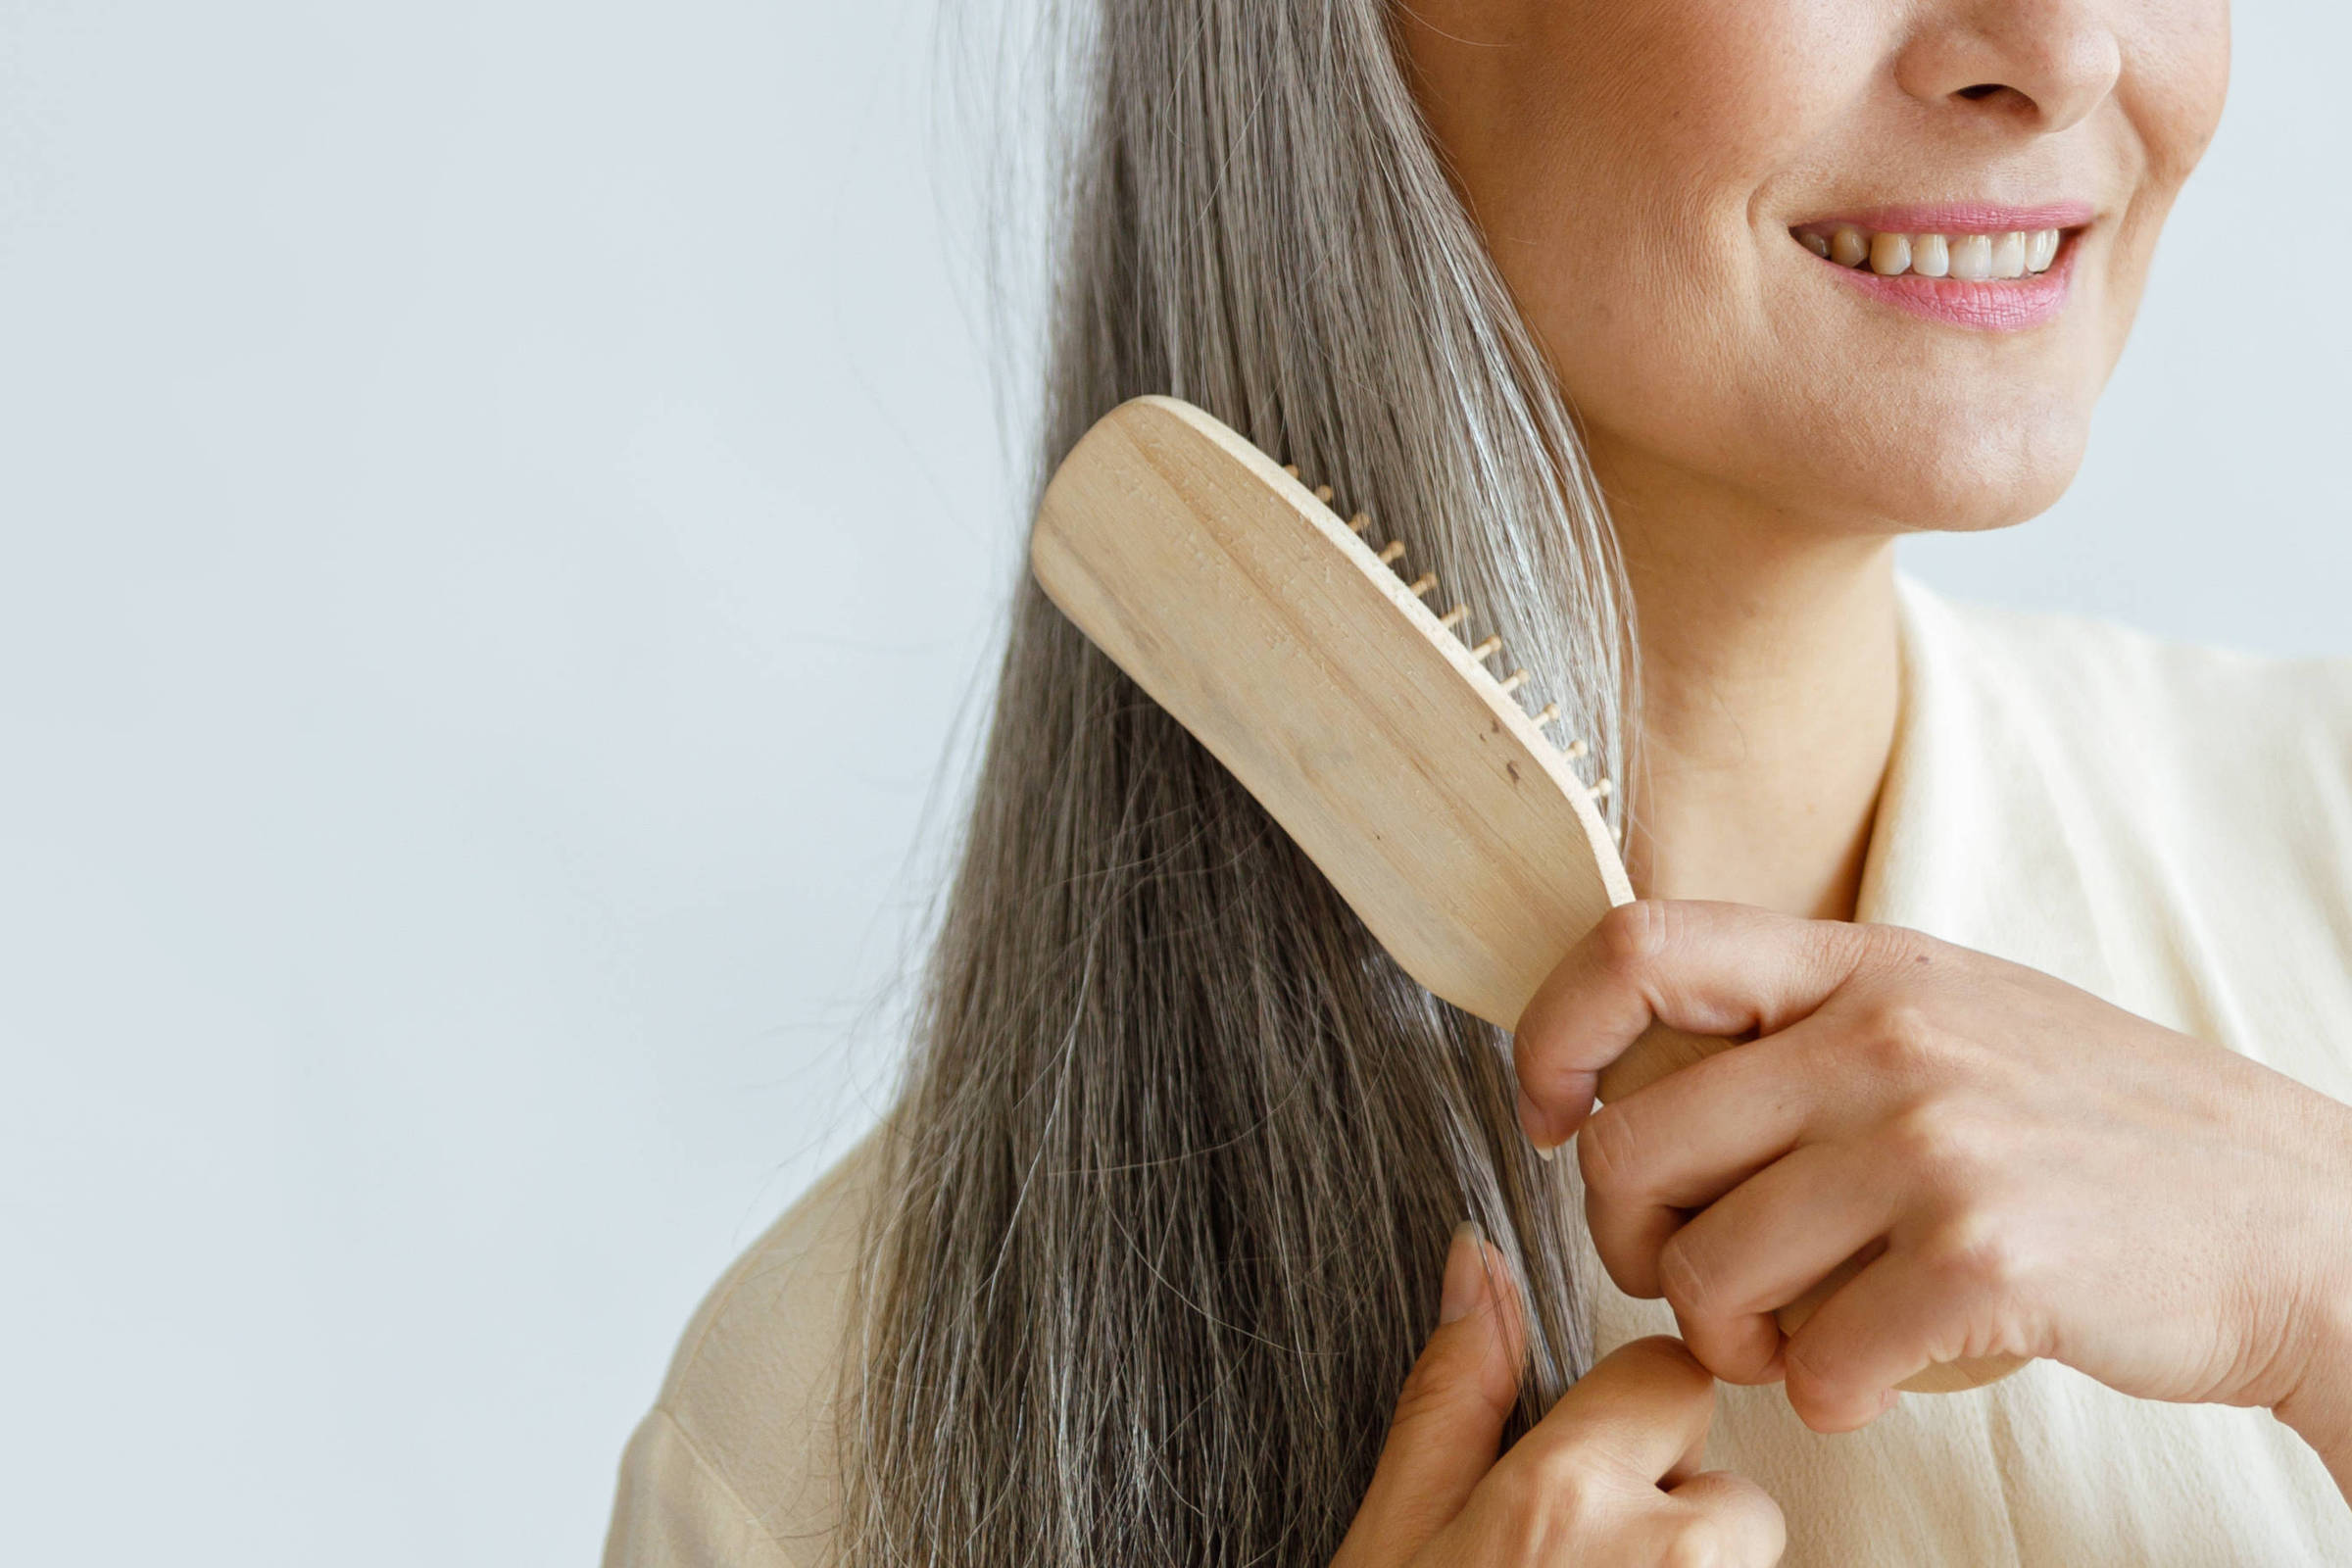 Menopause can change hair volume and texture